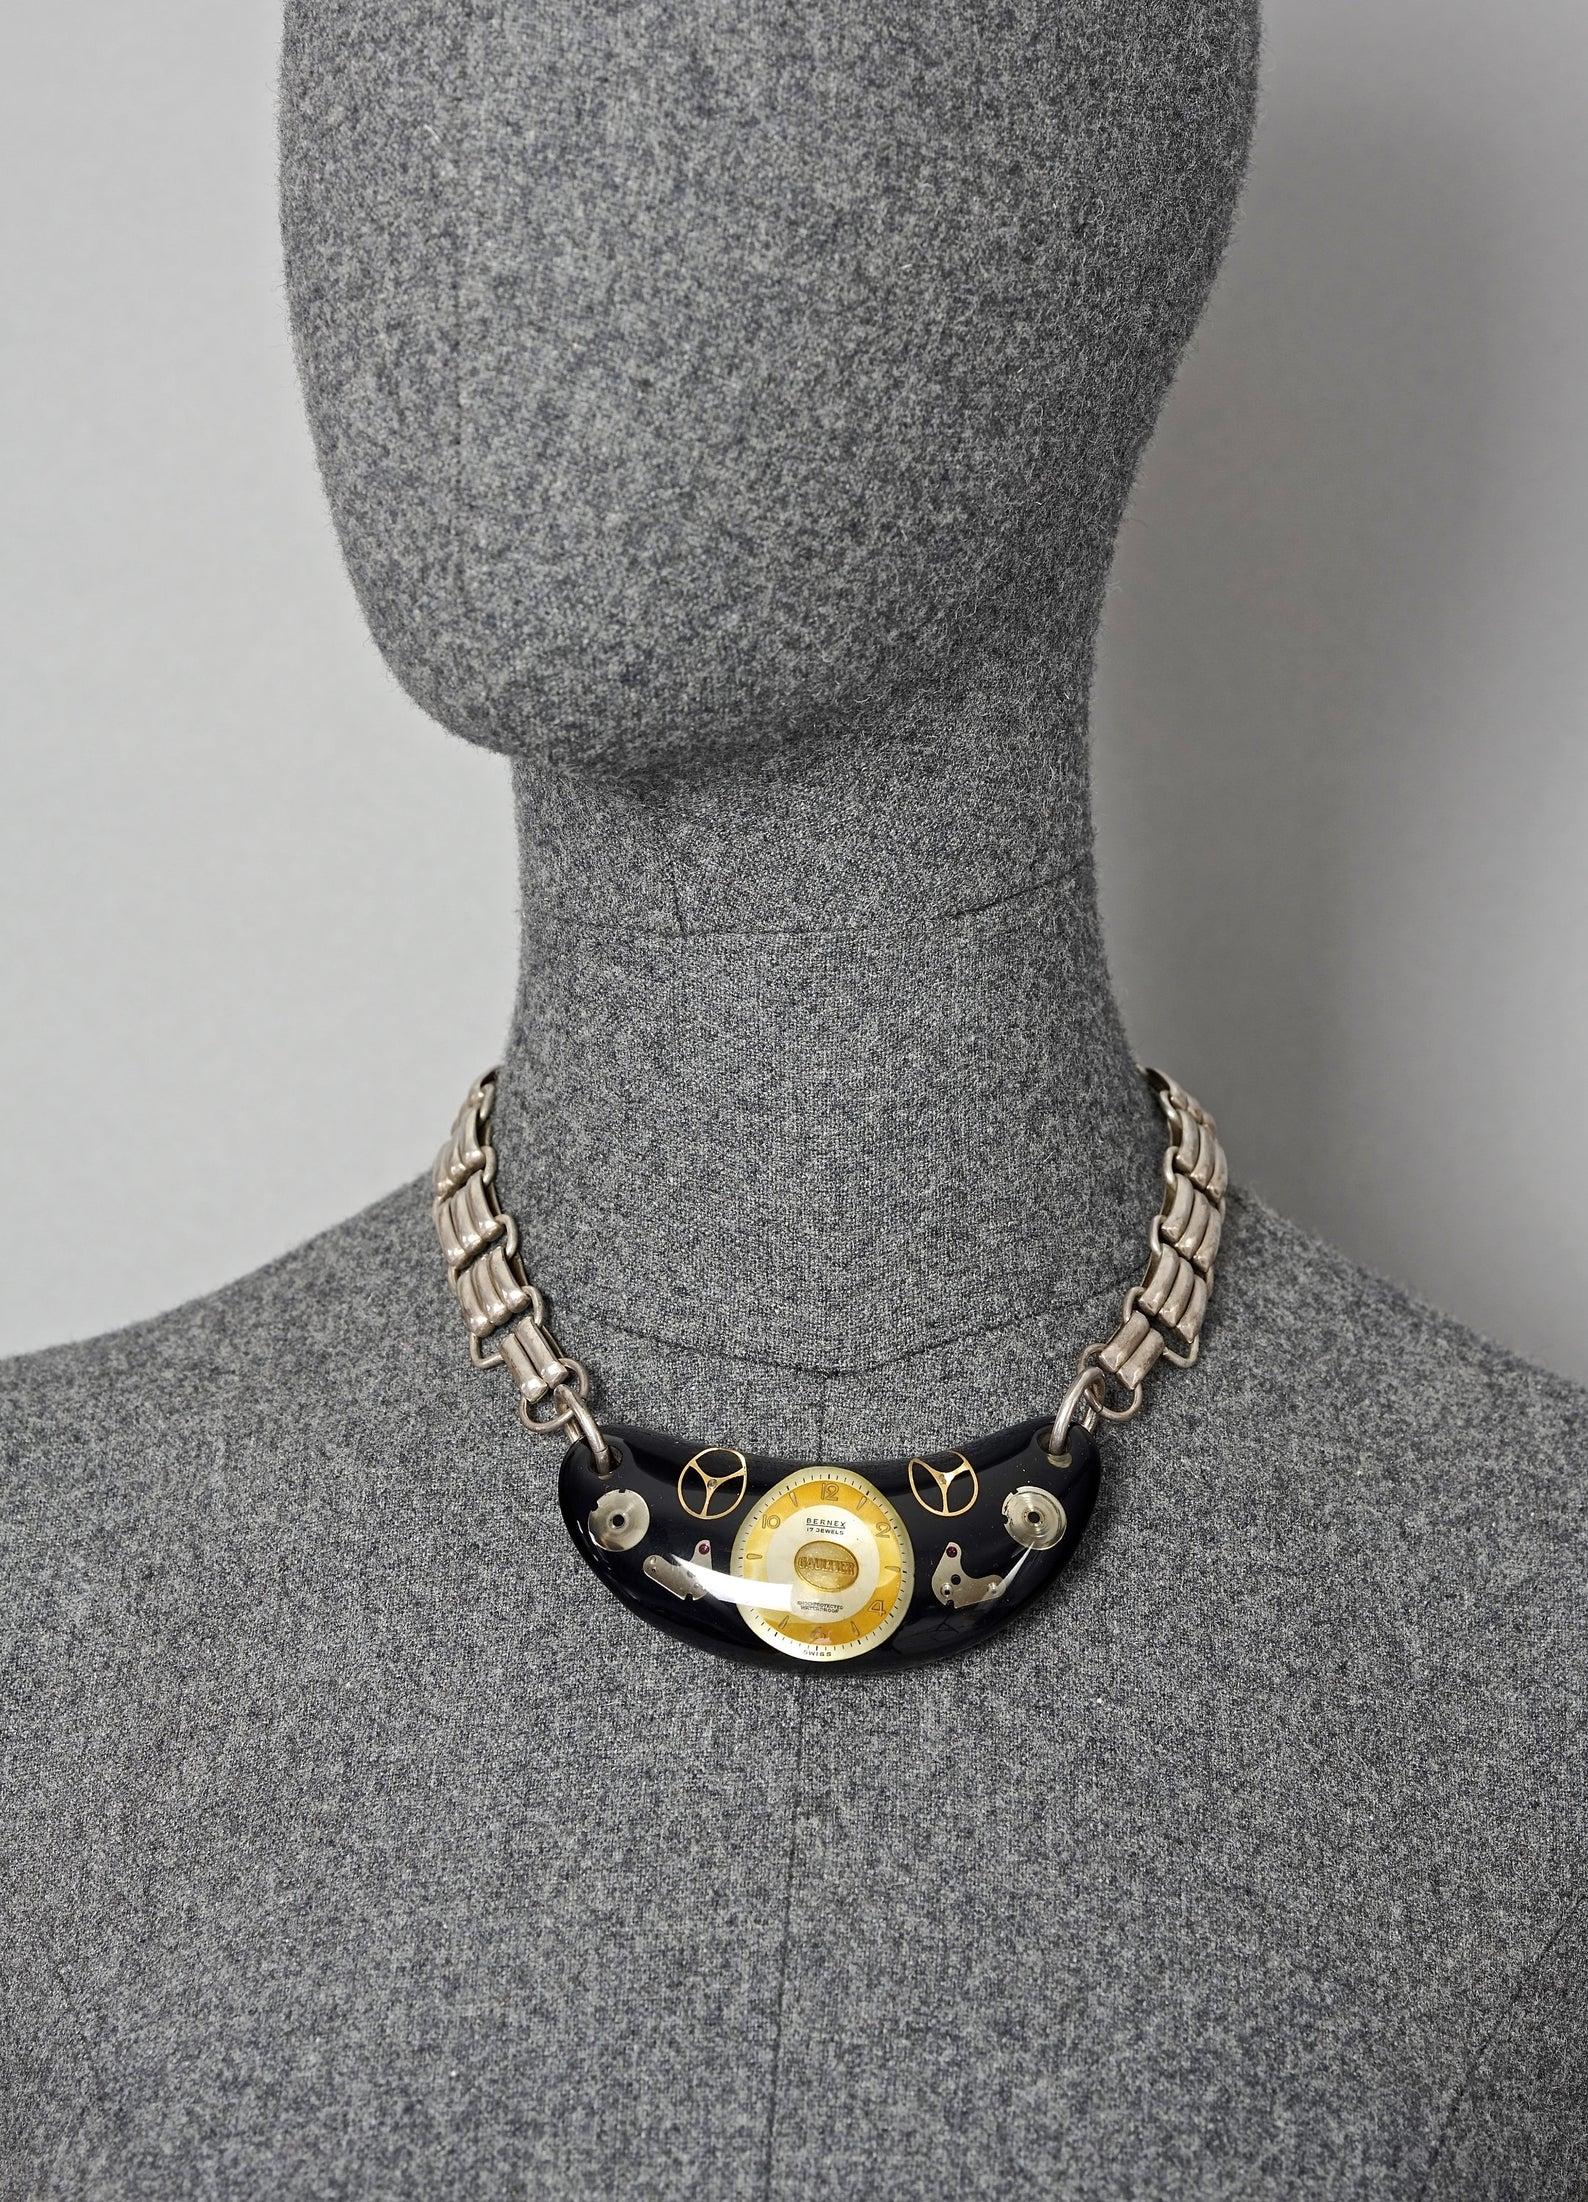 Vintage JEAN PAUL GAULTIER Steampunk Watch Lucite Choker Necklace In Excellent Condition For Sale In Kingersheim, Alsace